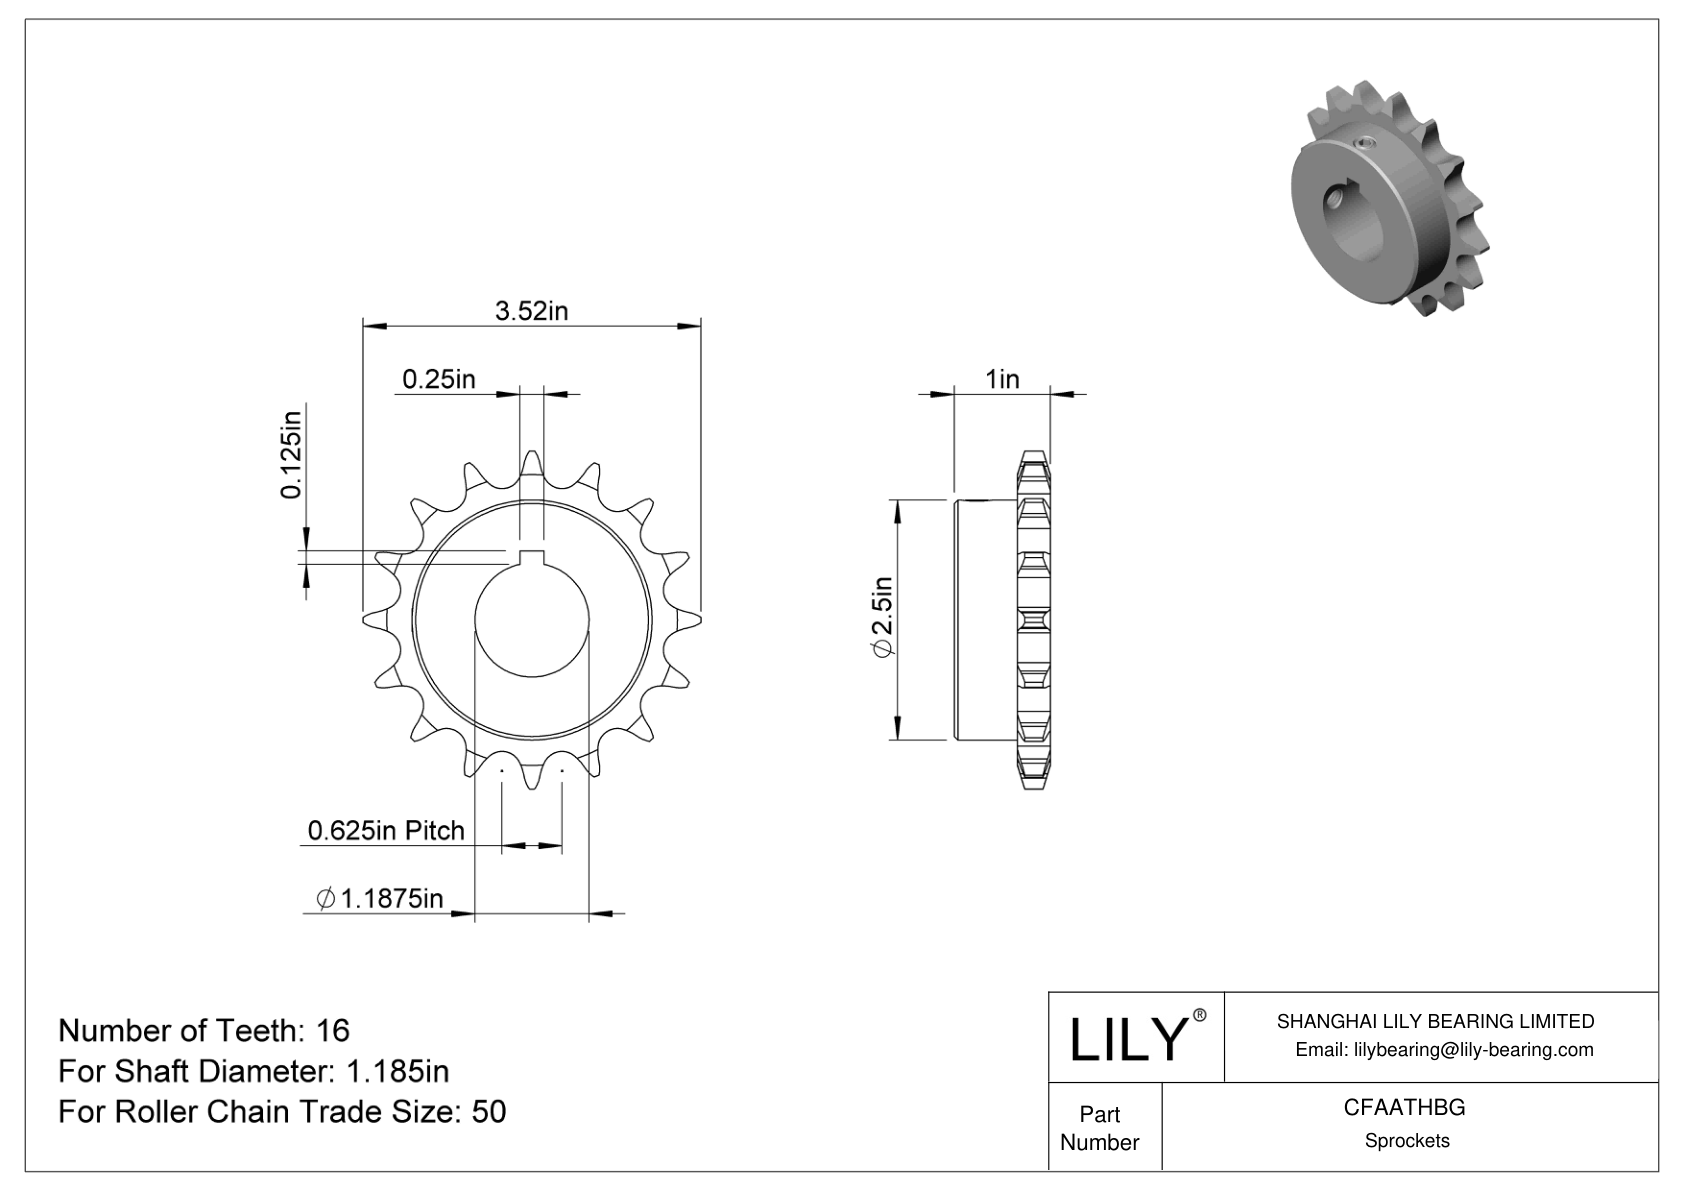 CFAATHBG Wear-Resistant Sprockets for ANSI Roller Chain cad drawing